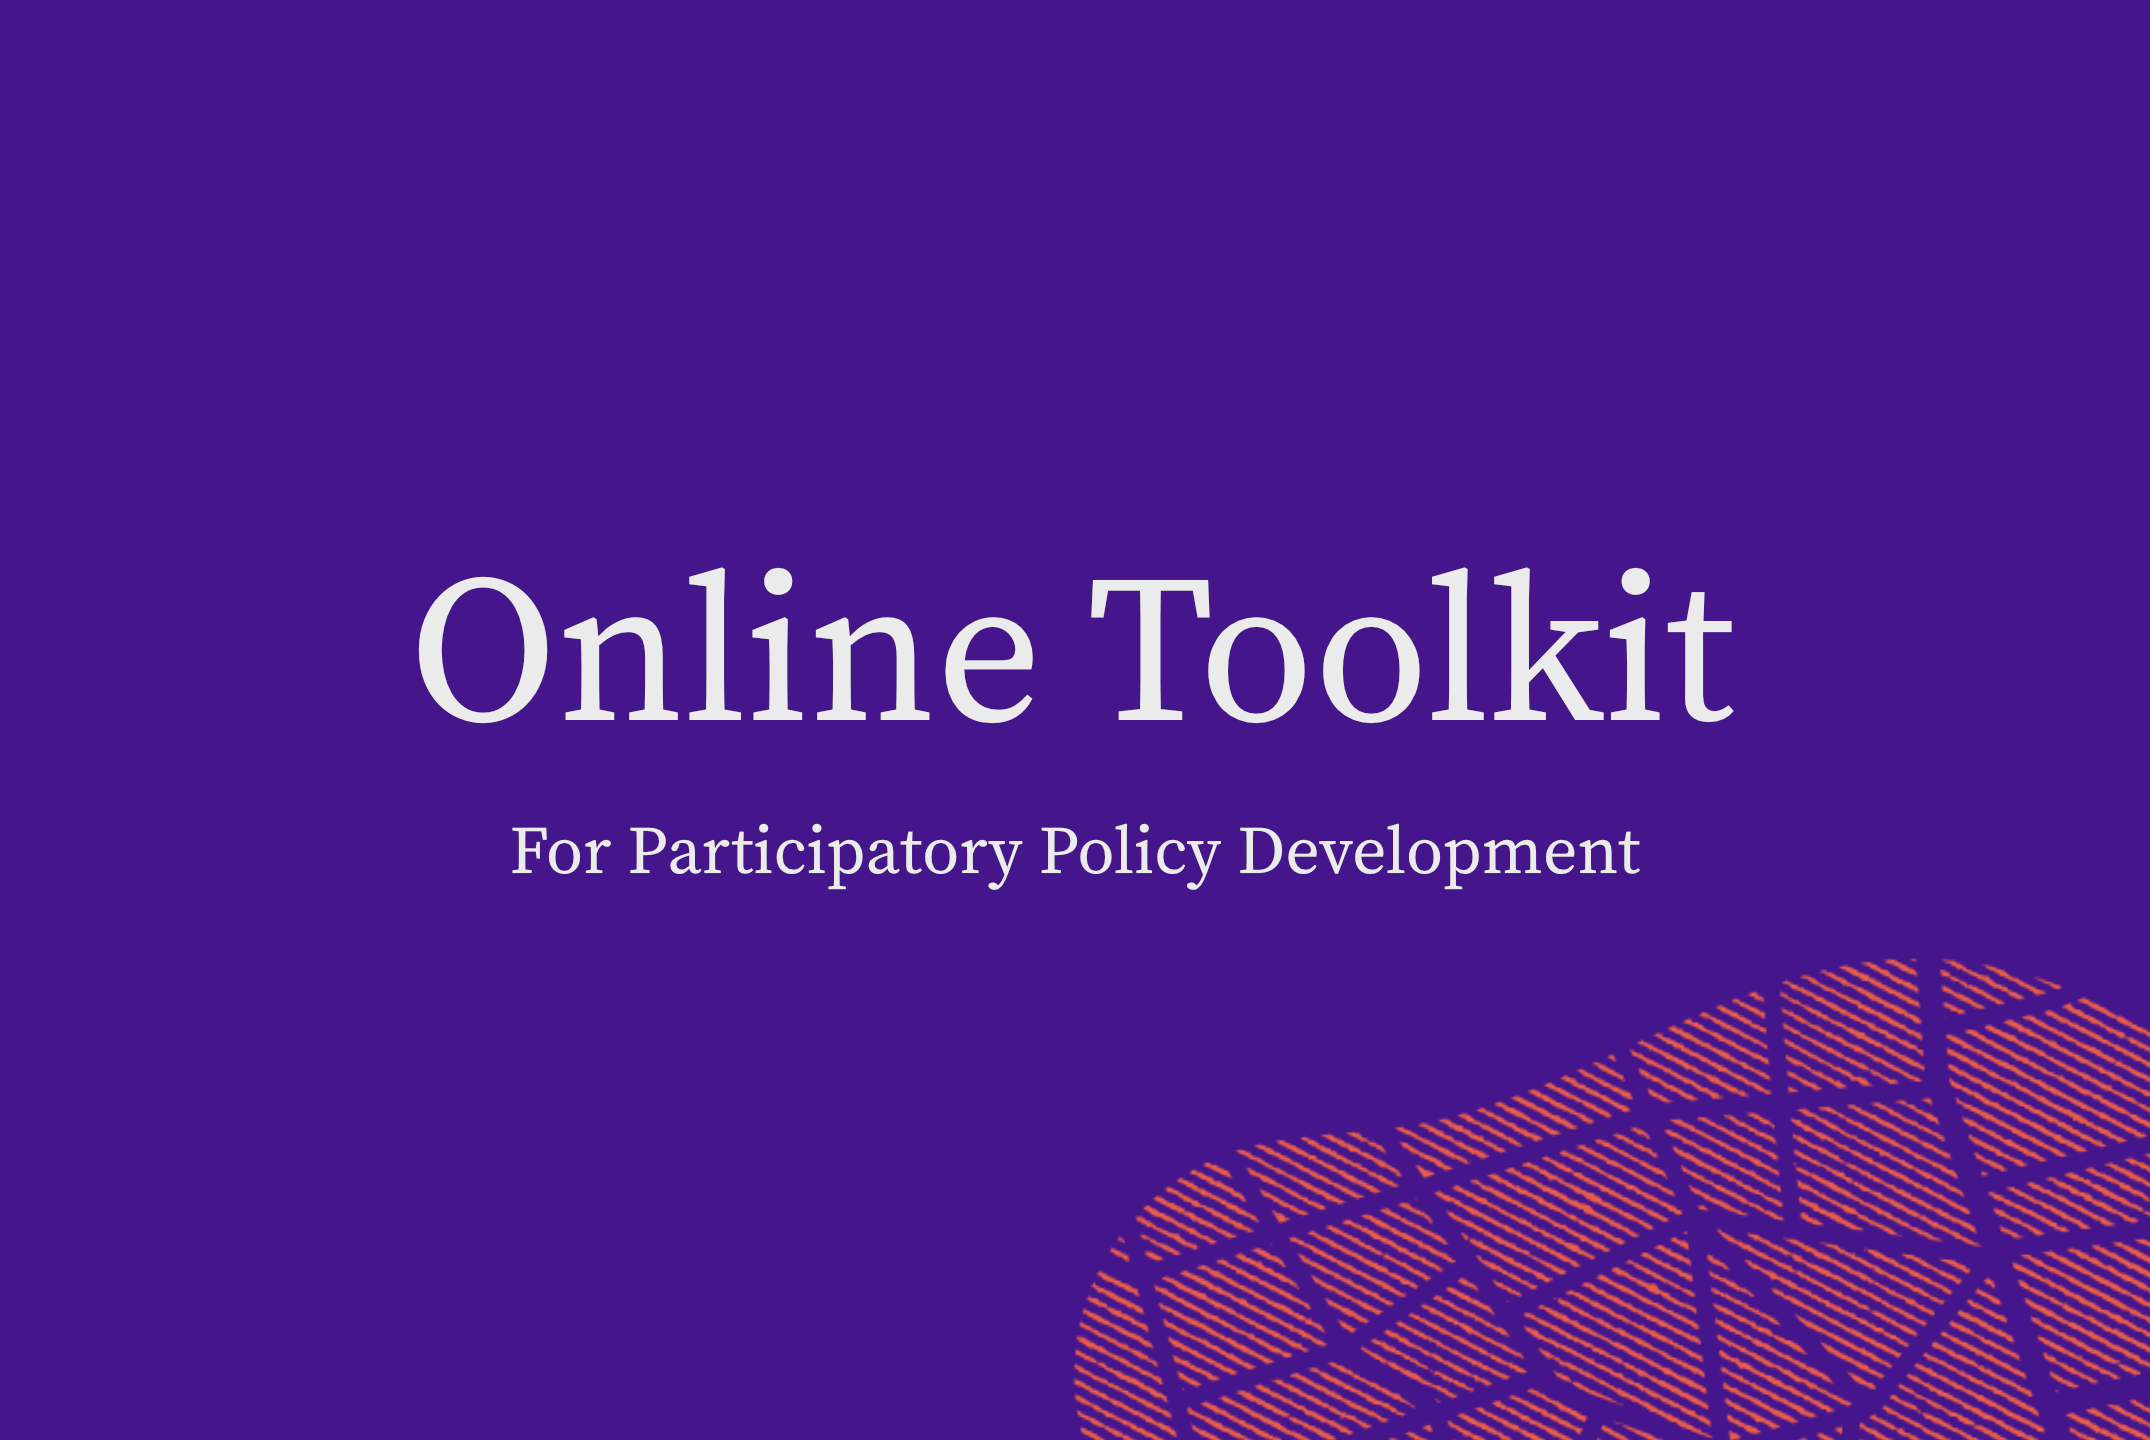 Toolkit on participatory policy making